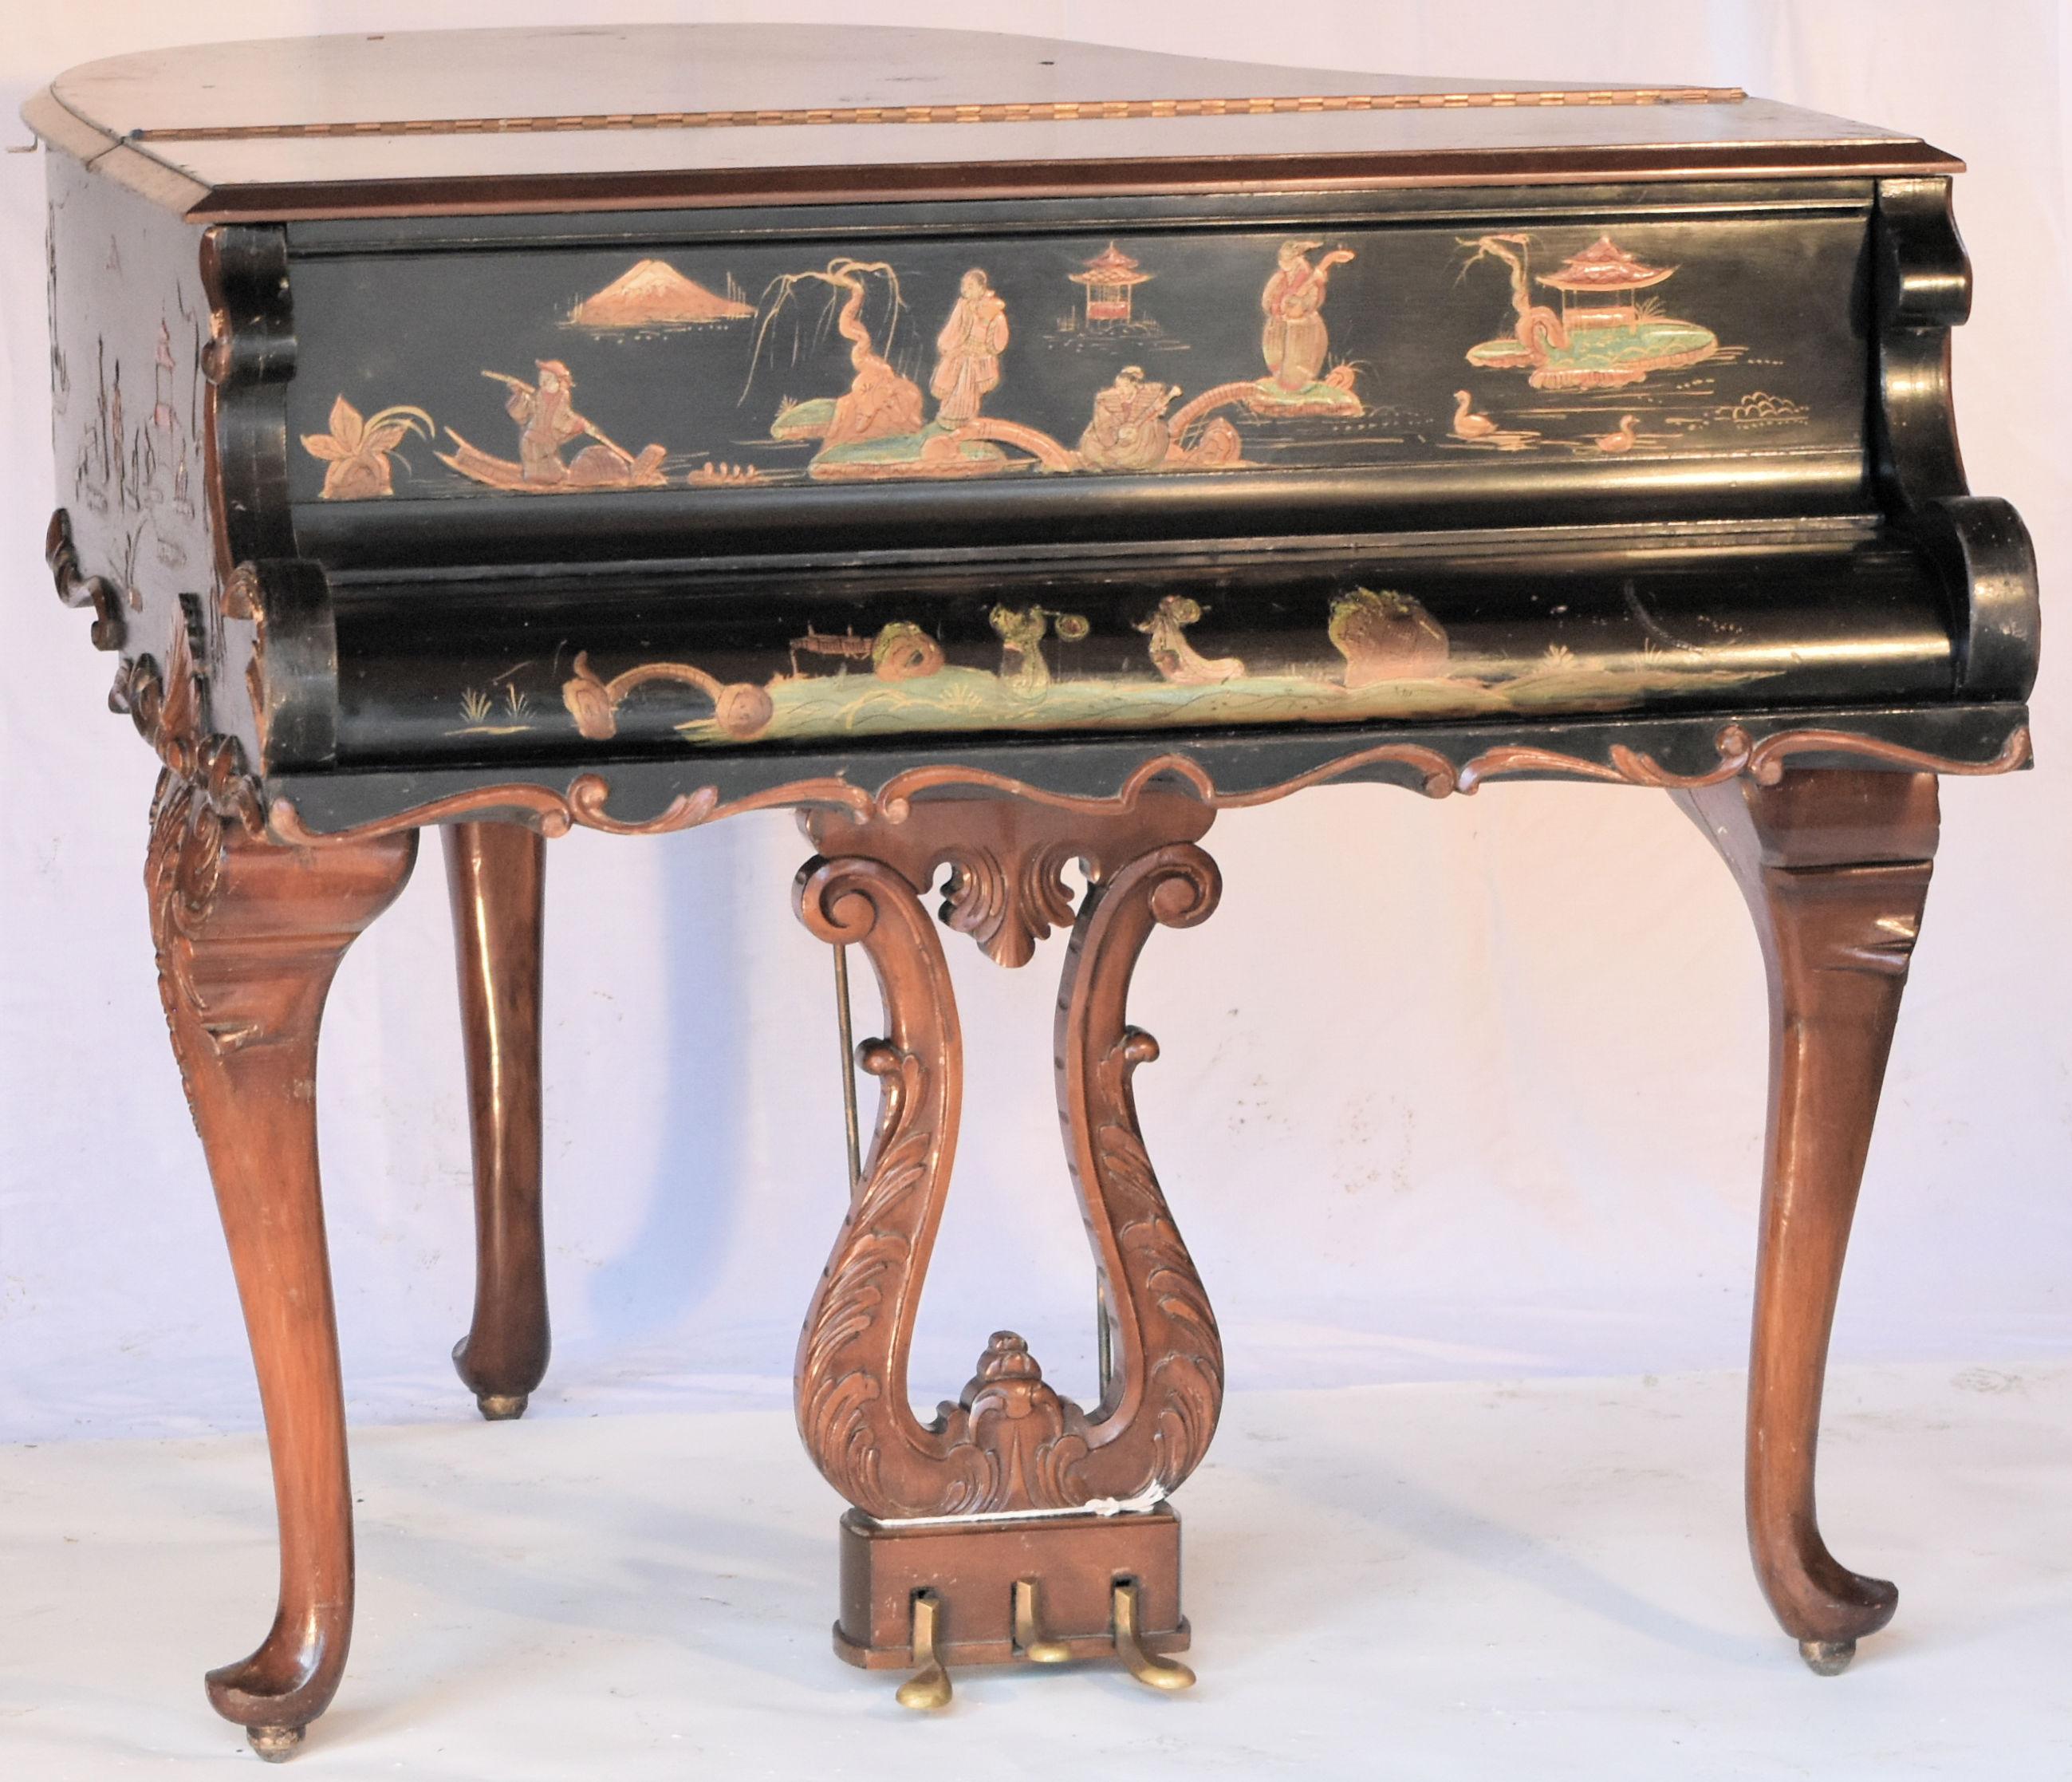 Custom made Louis XV style piano writing desk fashioned after a Steinway style Grand Piano Model O with chinoiserie art case. This unique desk features shelving for writing supplies and a large flip-up area storage cabinet in the back of the